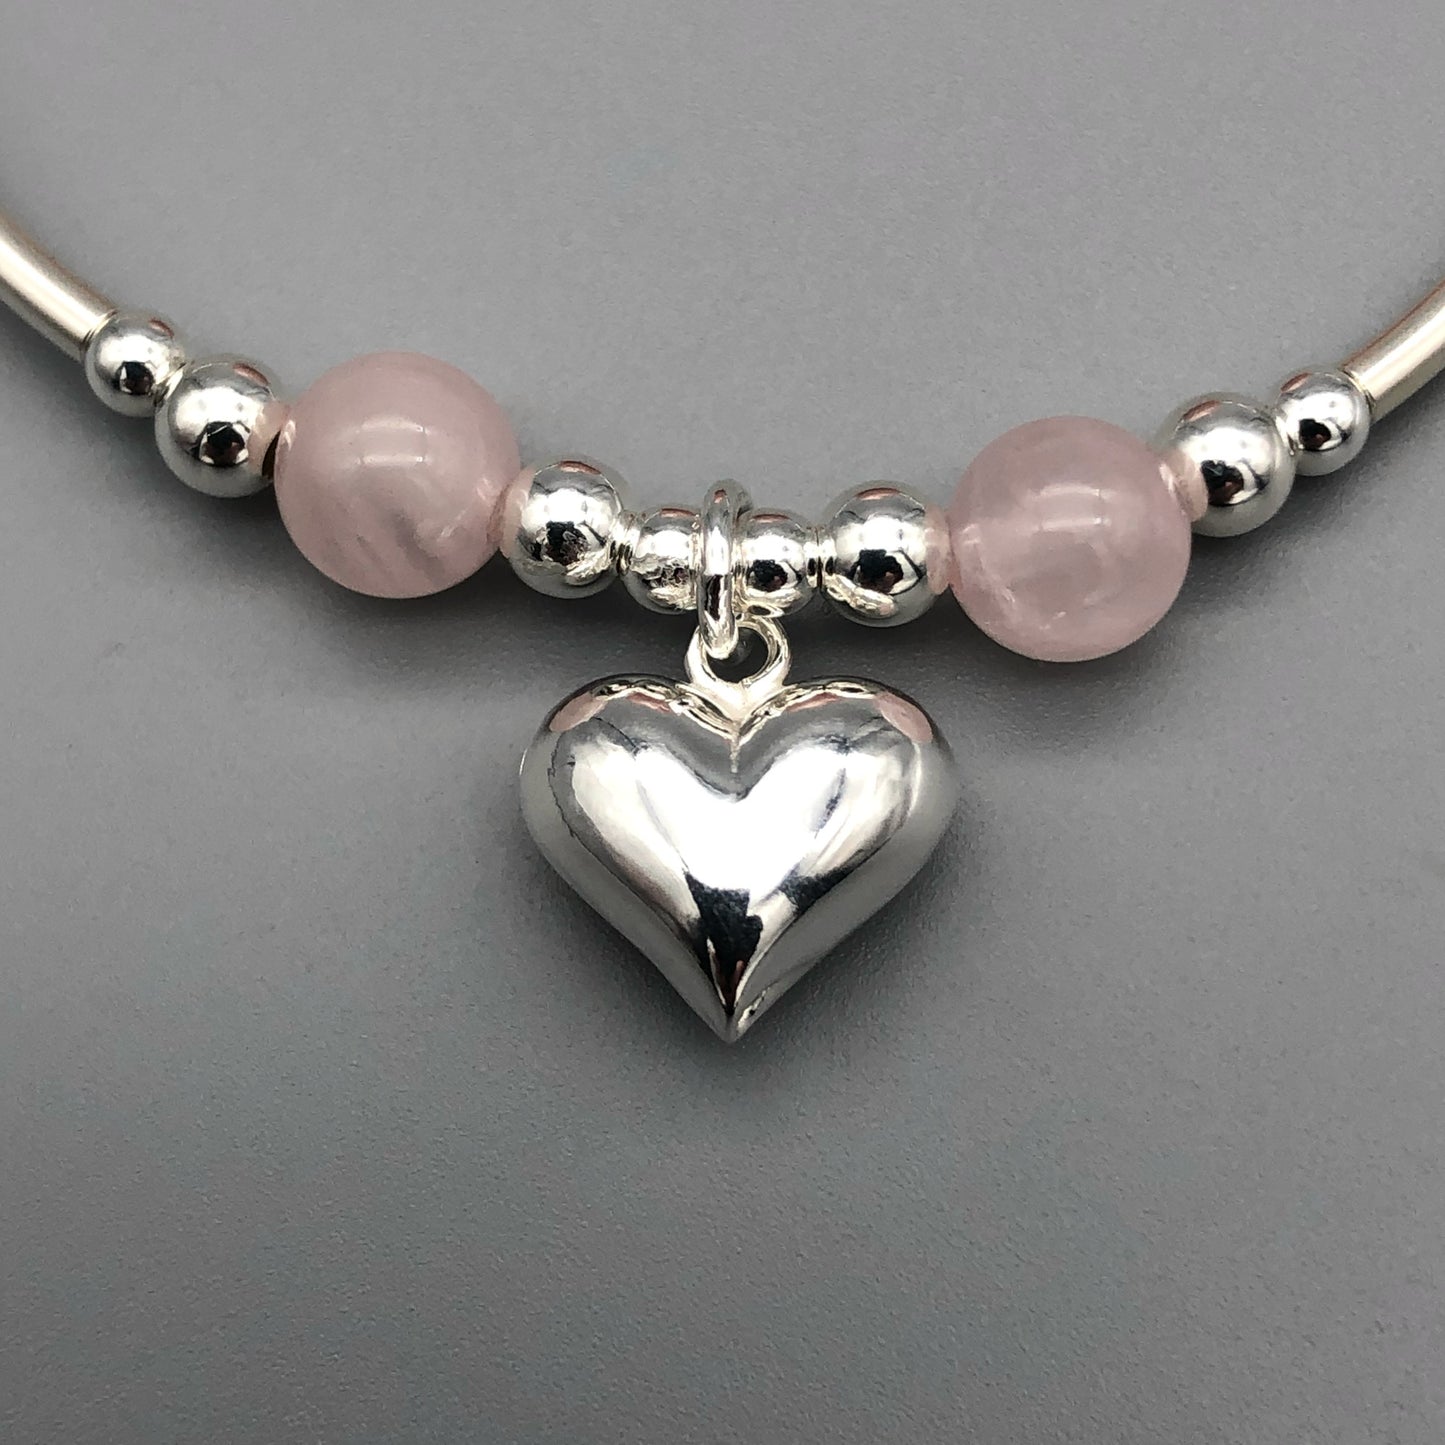 Closeup of Rose quartz puff heart charm sterling silver women's stacking bracelet by My Silver Wish